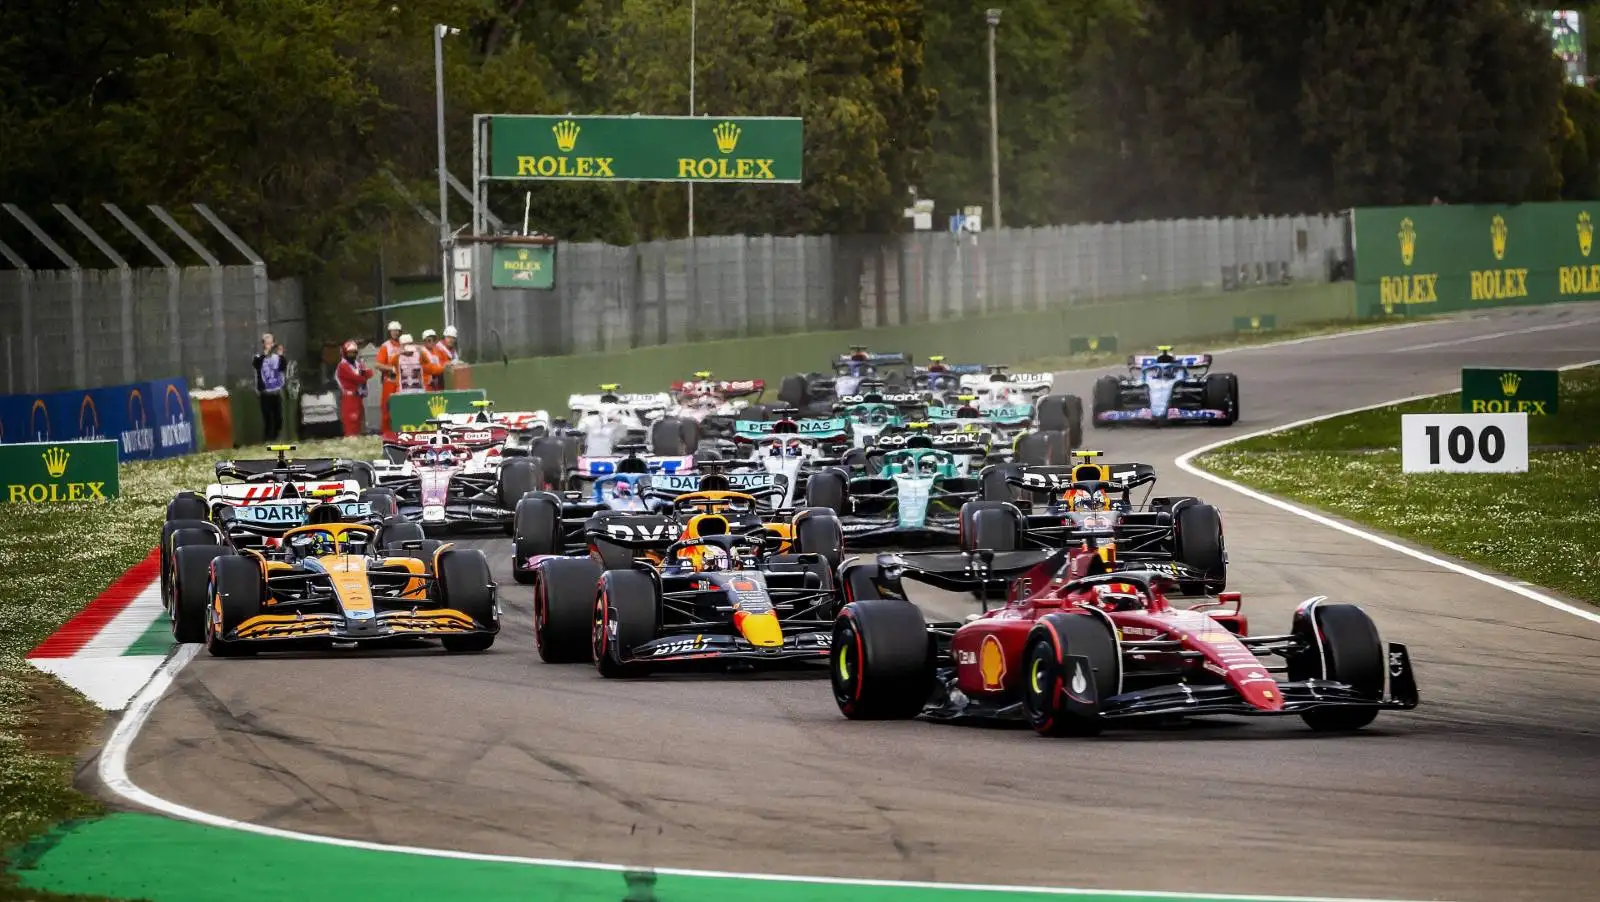 Charles Leclerc leads in the opening stages of the Emilia Romagna GP sprint. Imola April 2022.